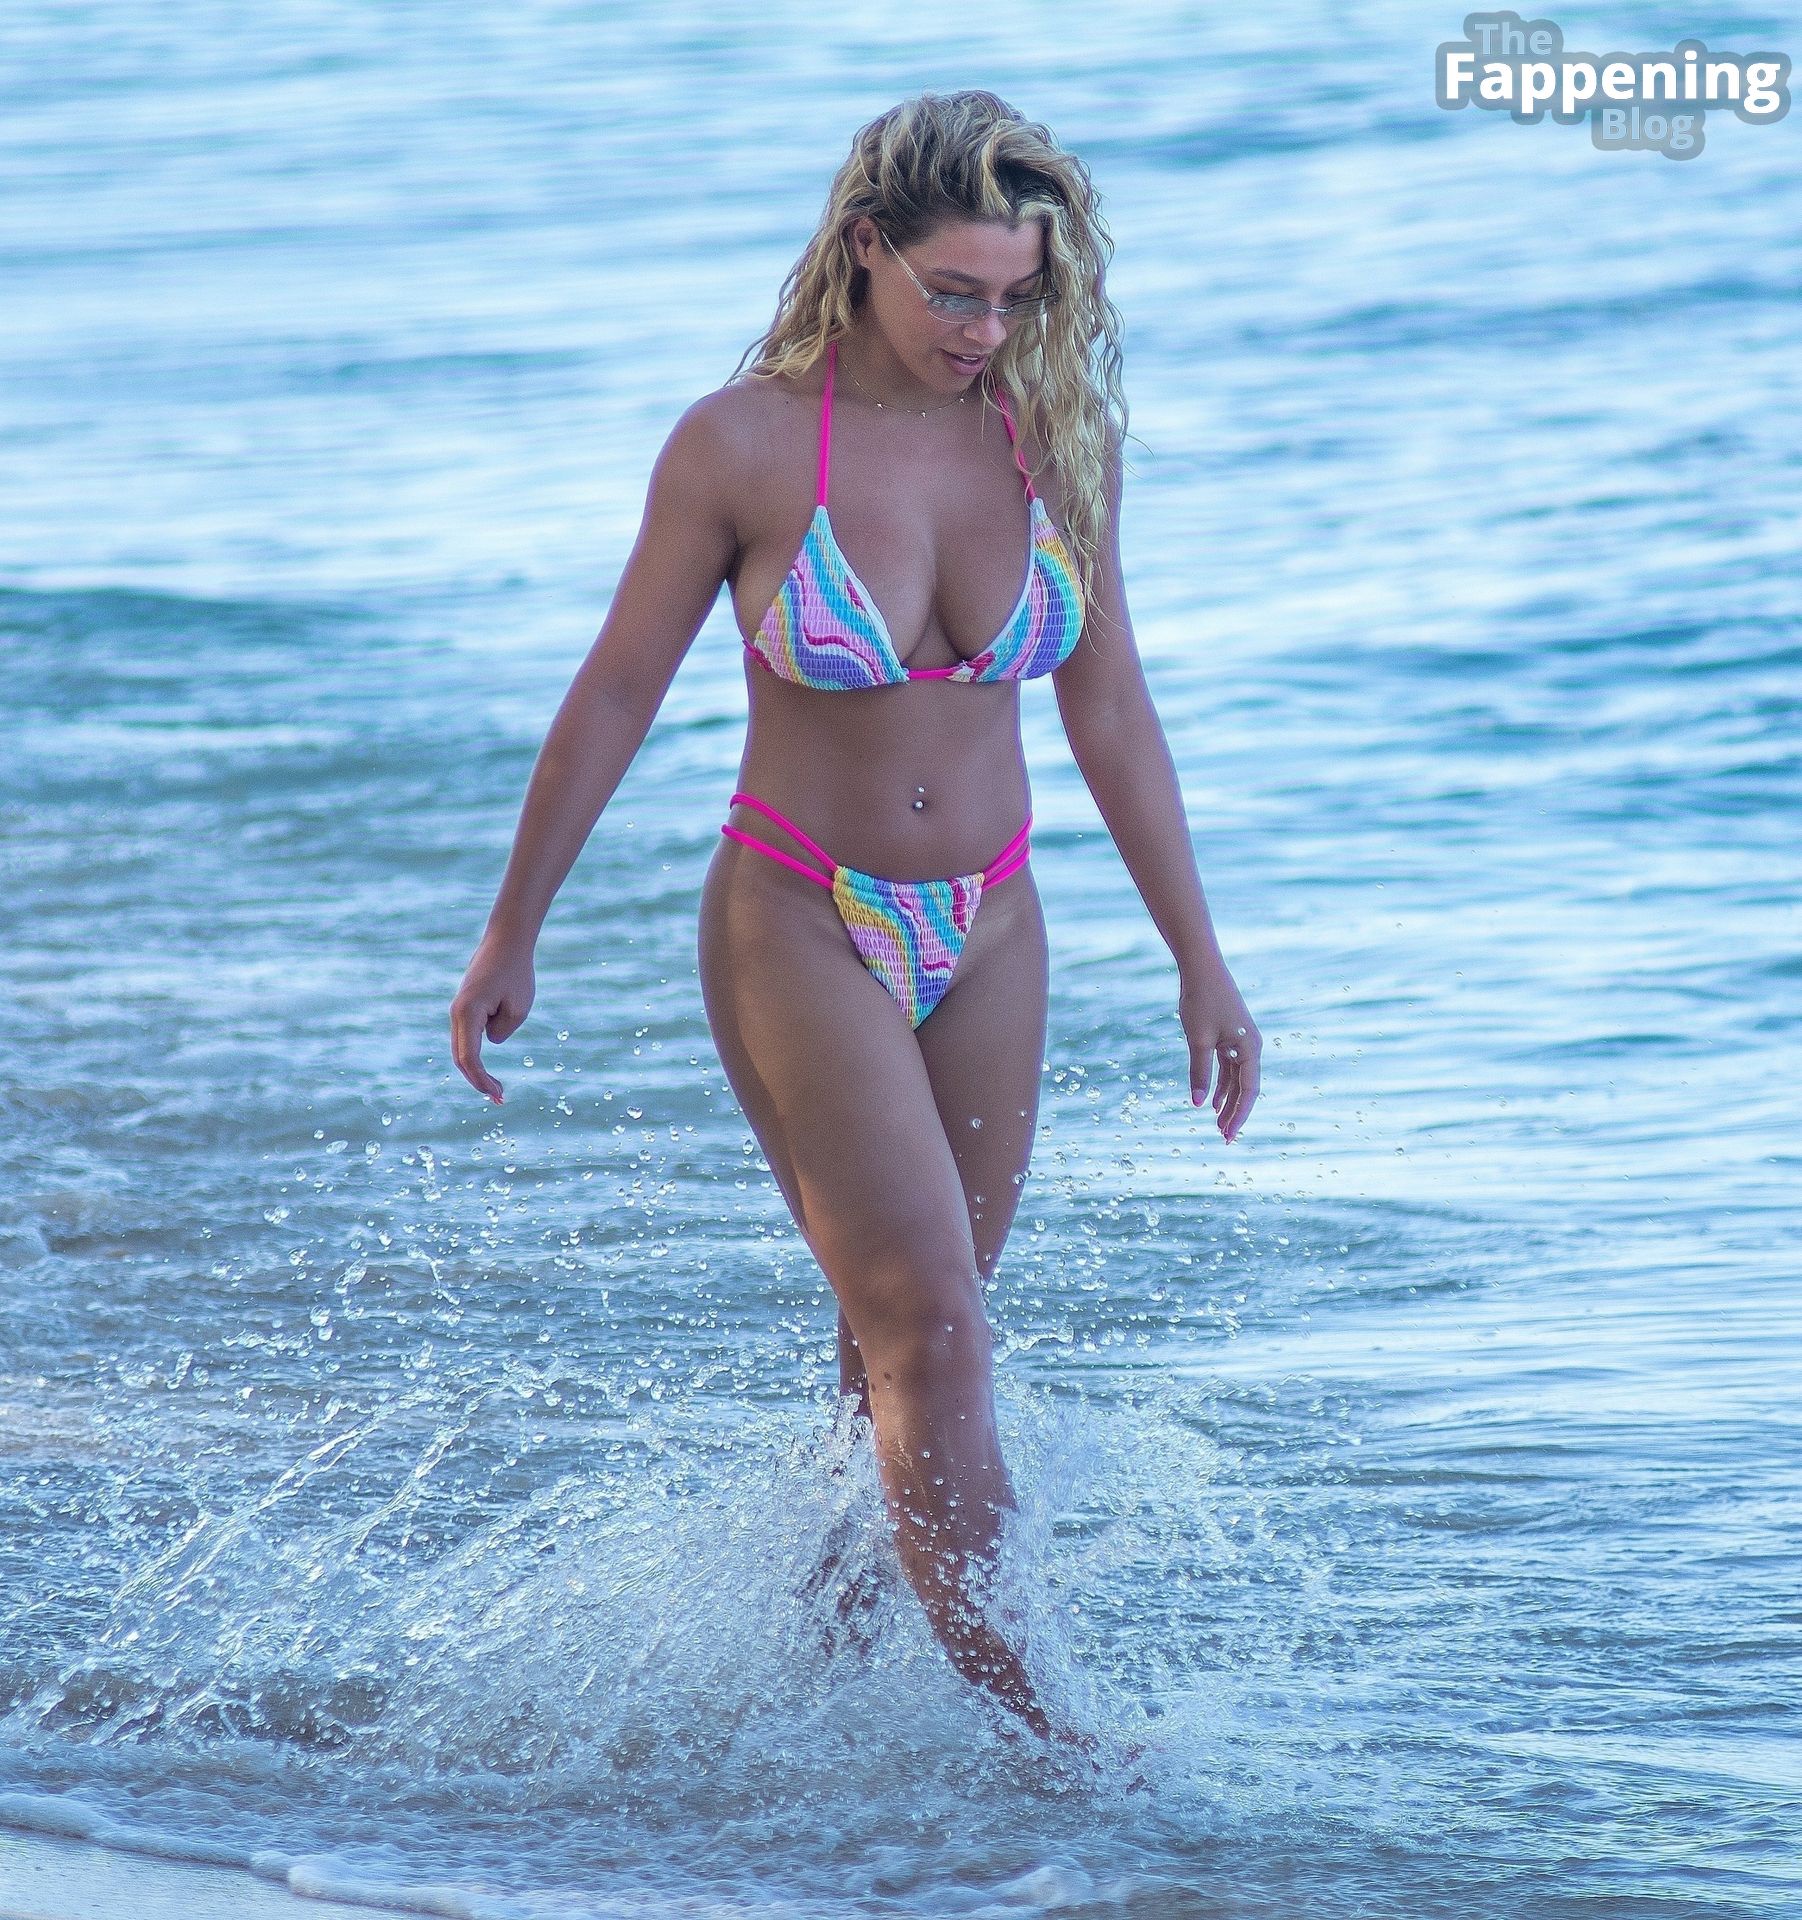 Molly Rainford Shows Off Her Sexy Bikini Body Out in the Hot Caribbean Sunshine (31 Photos)